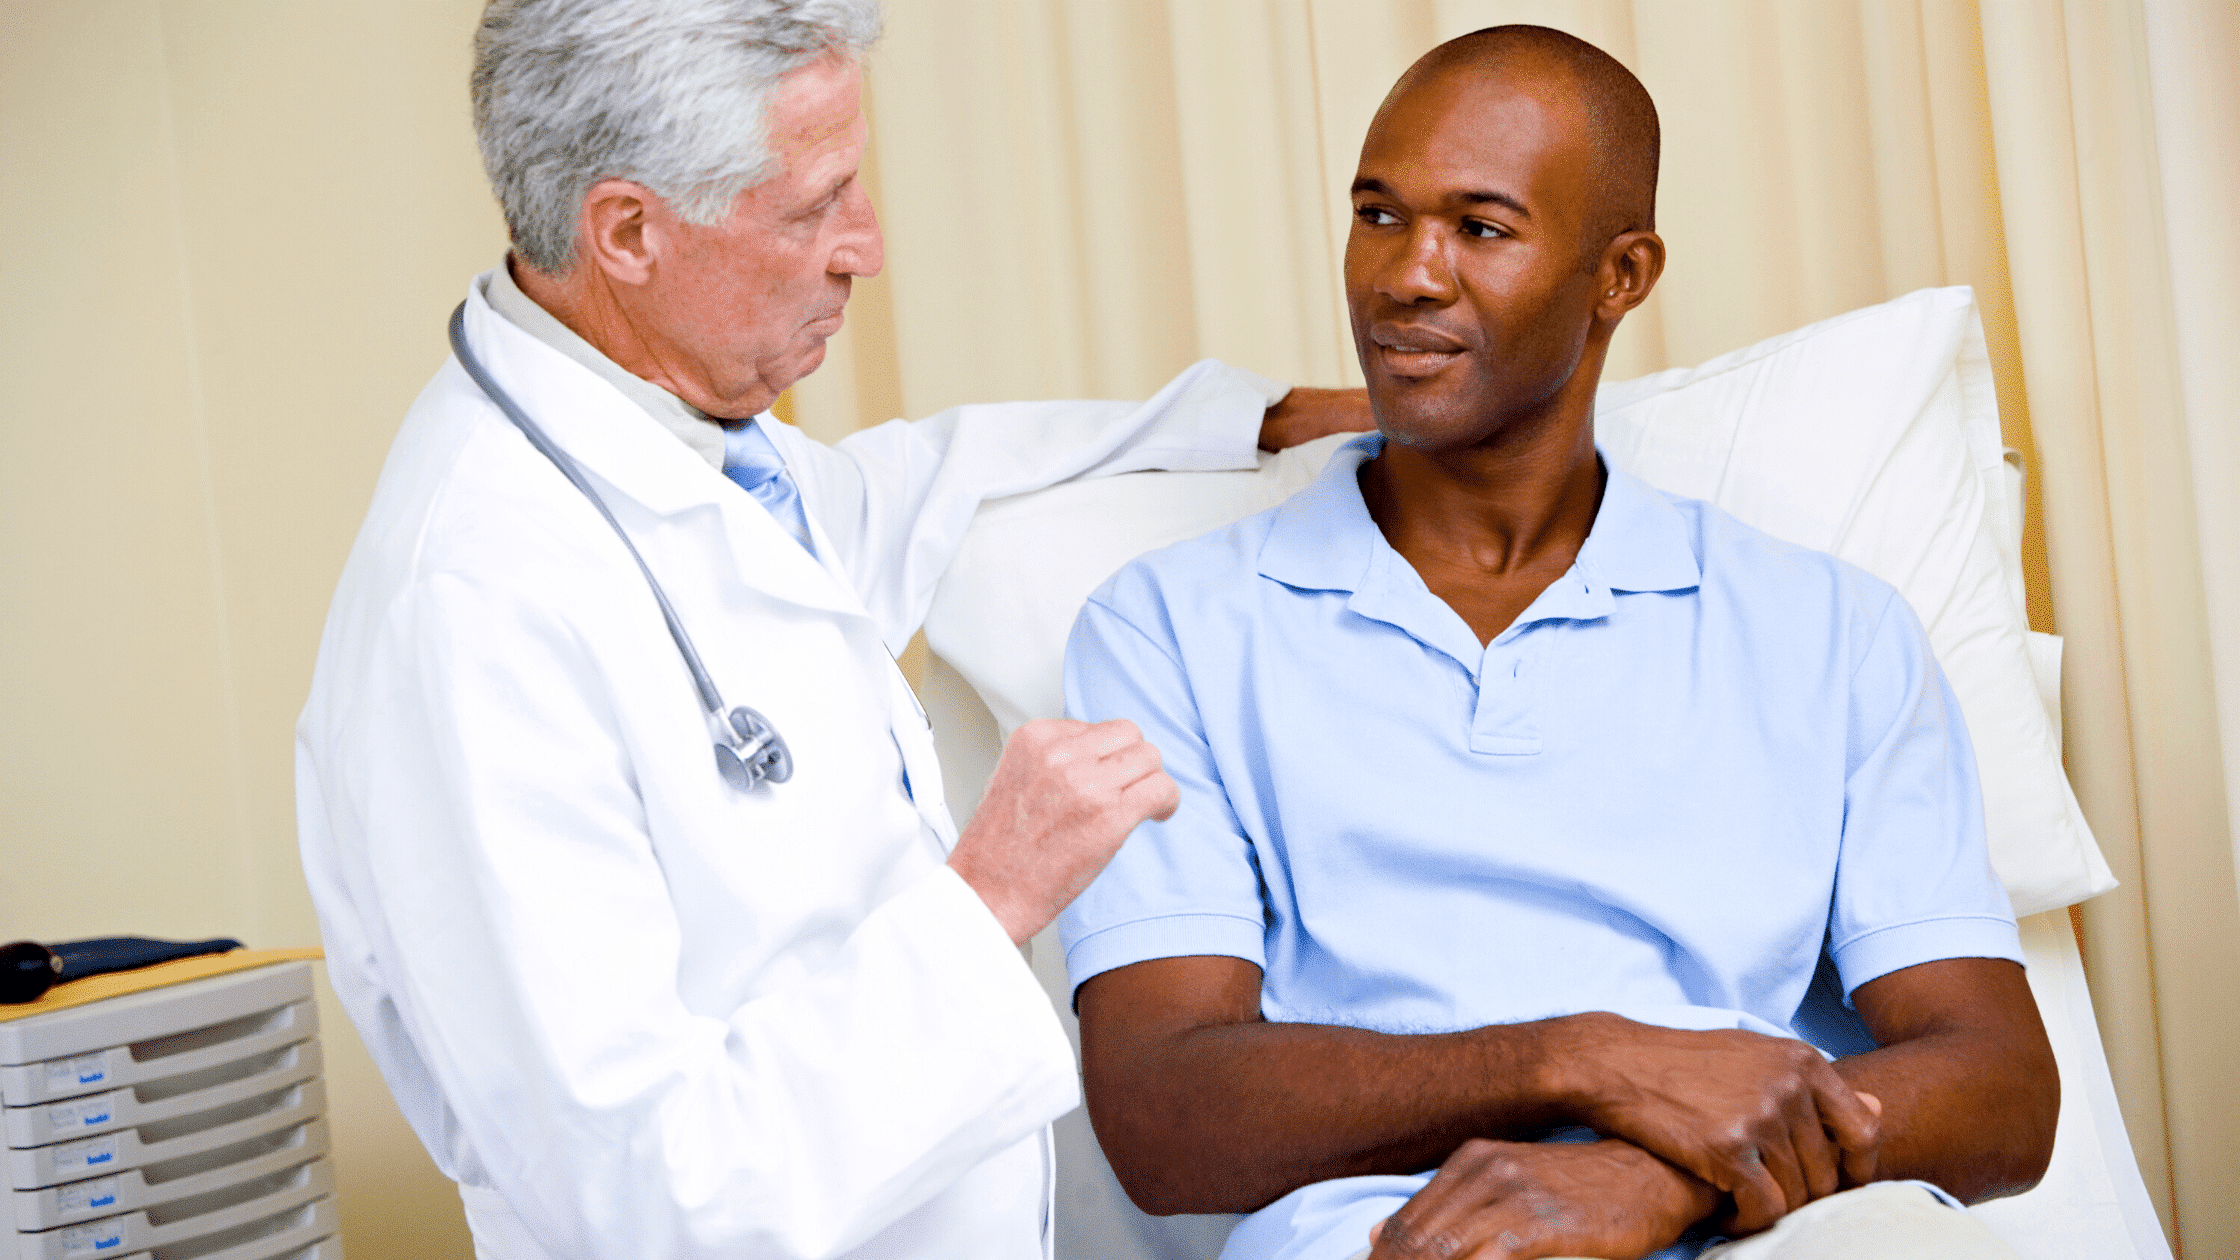 A doctor talking to a Black American man